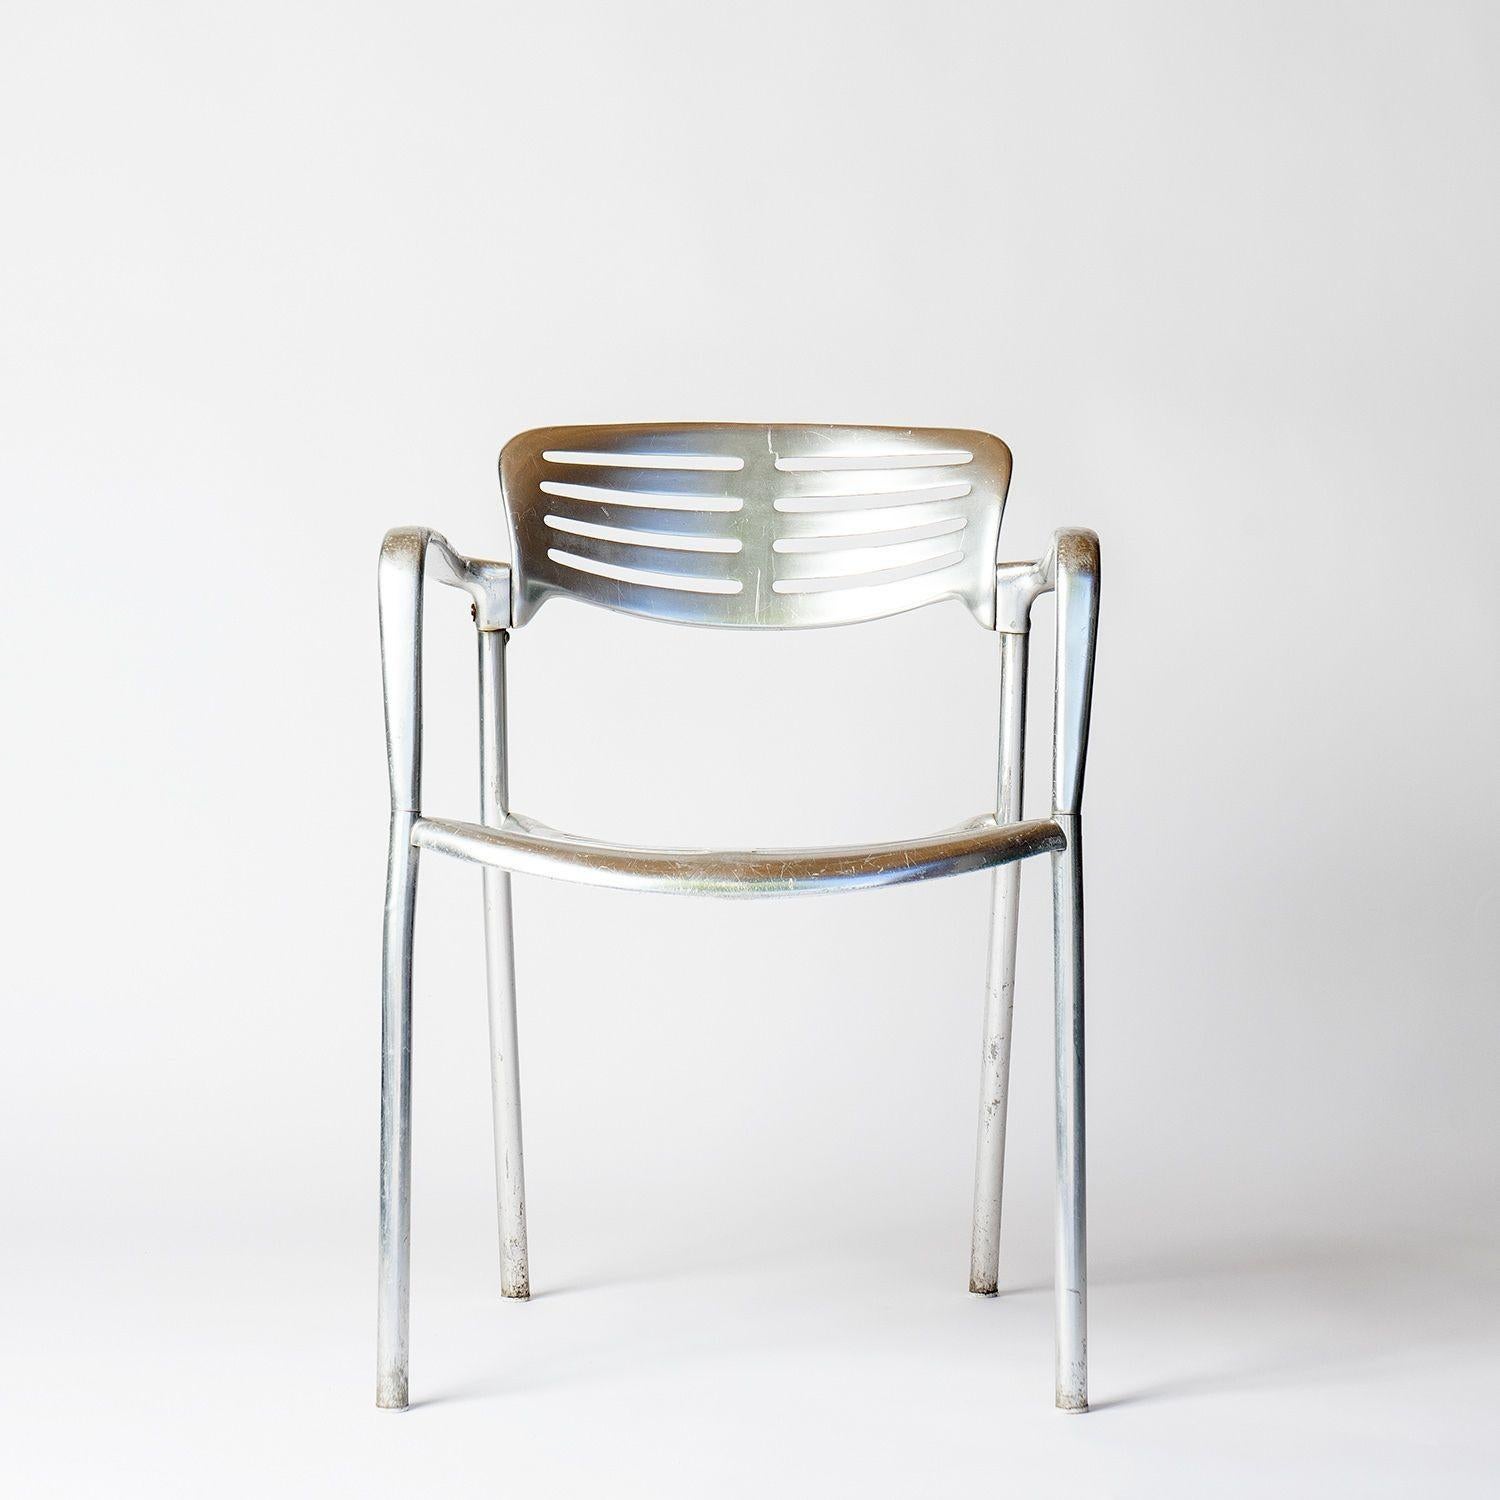 Post-Modern 'Toledo' Indoor/Outdoor Chair by Jorge Pensi for Amat, 1980s